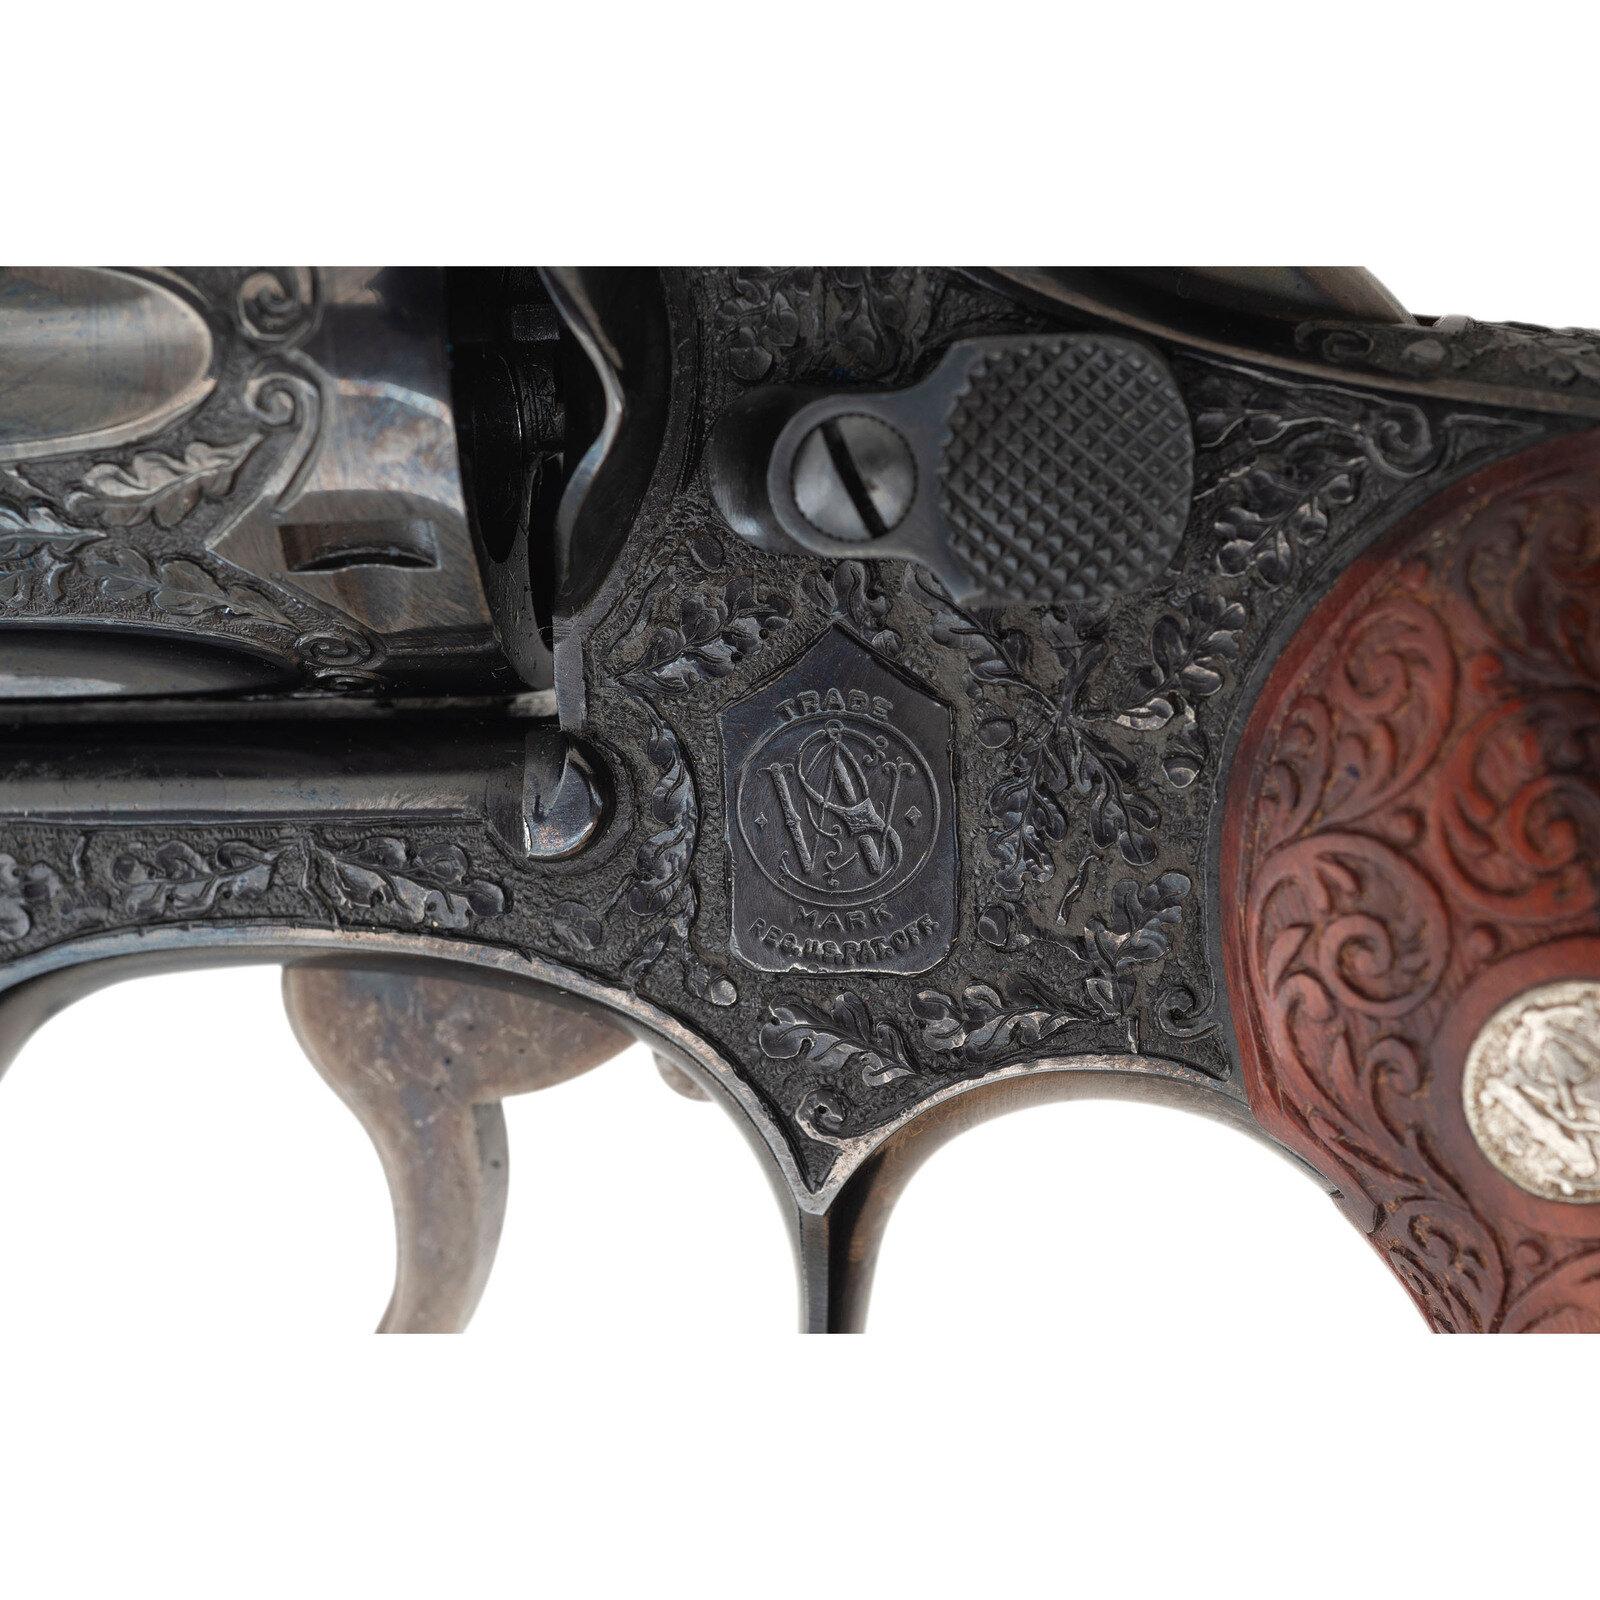 *Smith & Wesson K-38 Combat Masterpiece with German Style Deep Relief Engraving